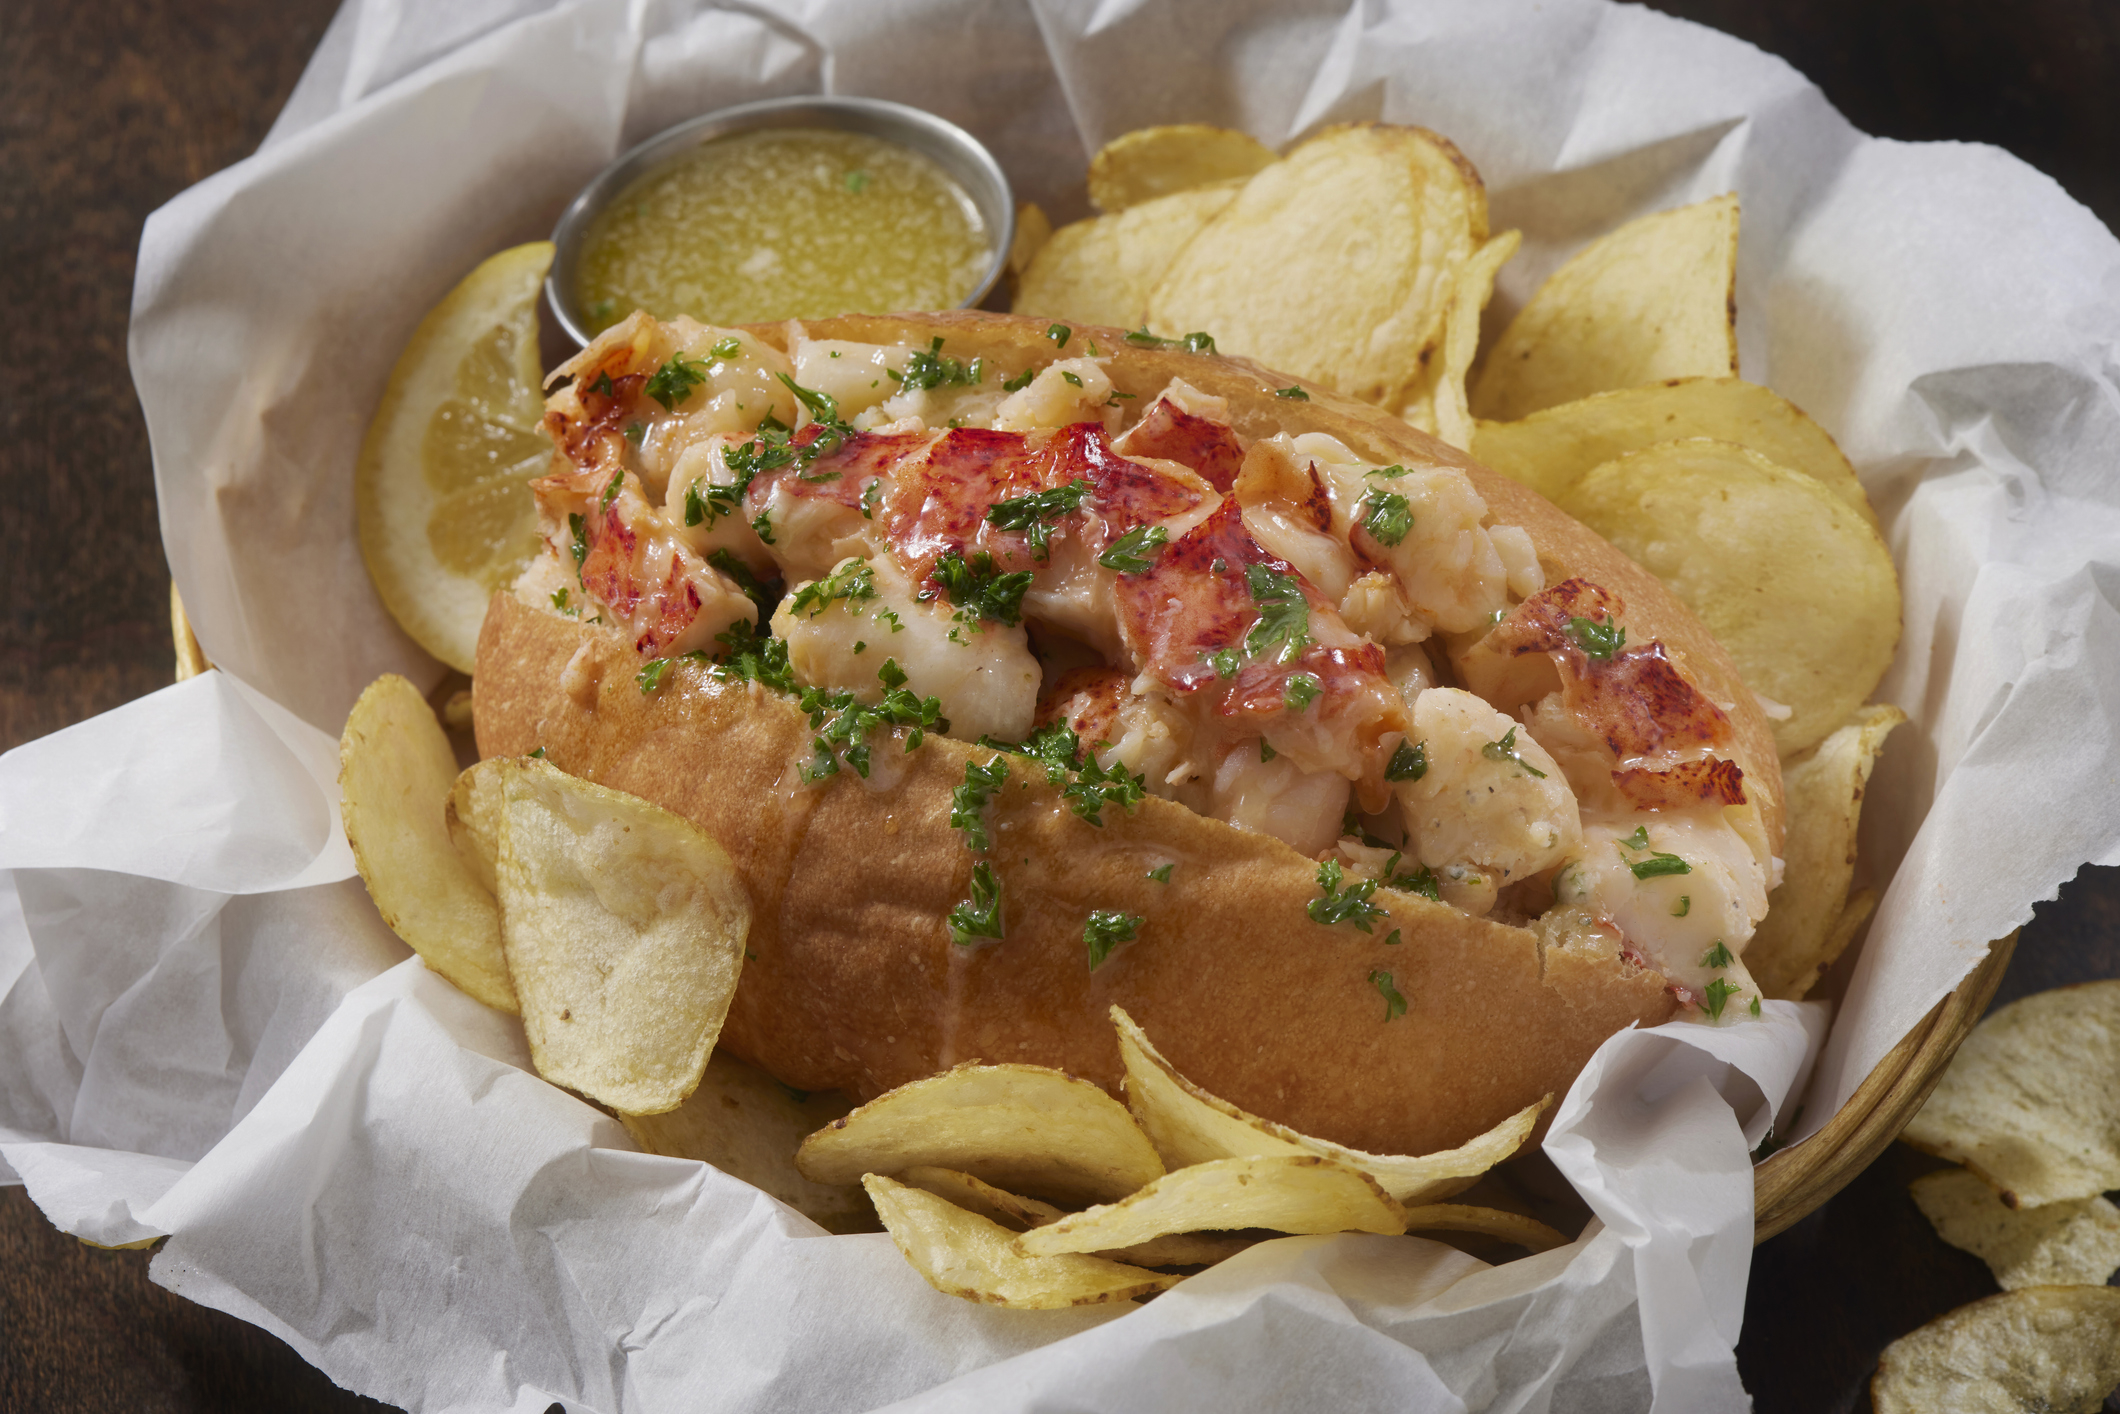 Lobster roll in bun with side of chips and lemon slices, presented in a basket